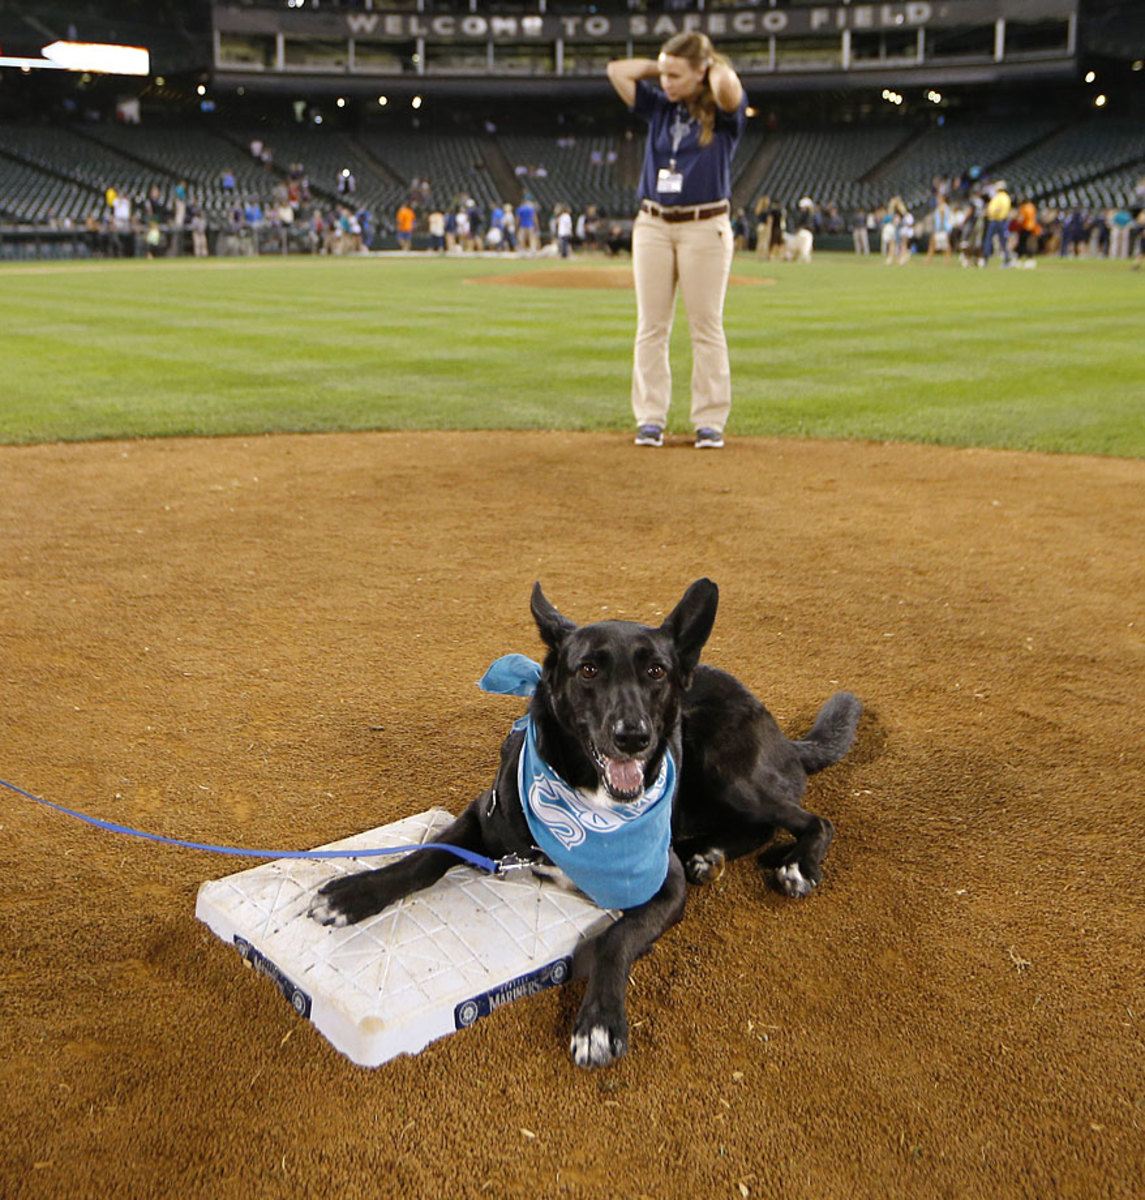 seattle-mariners-bark-in-the-park-dog(2).jpg